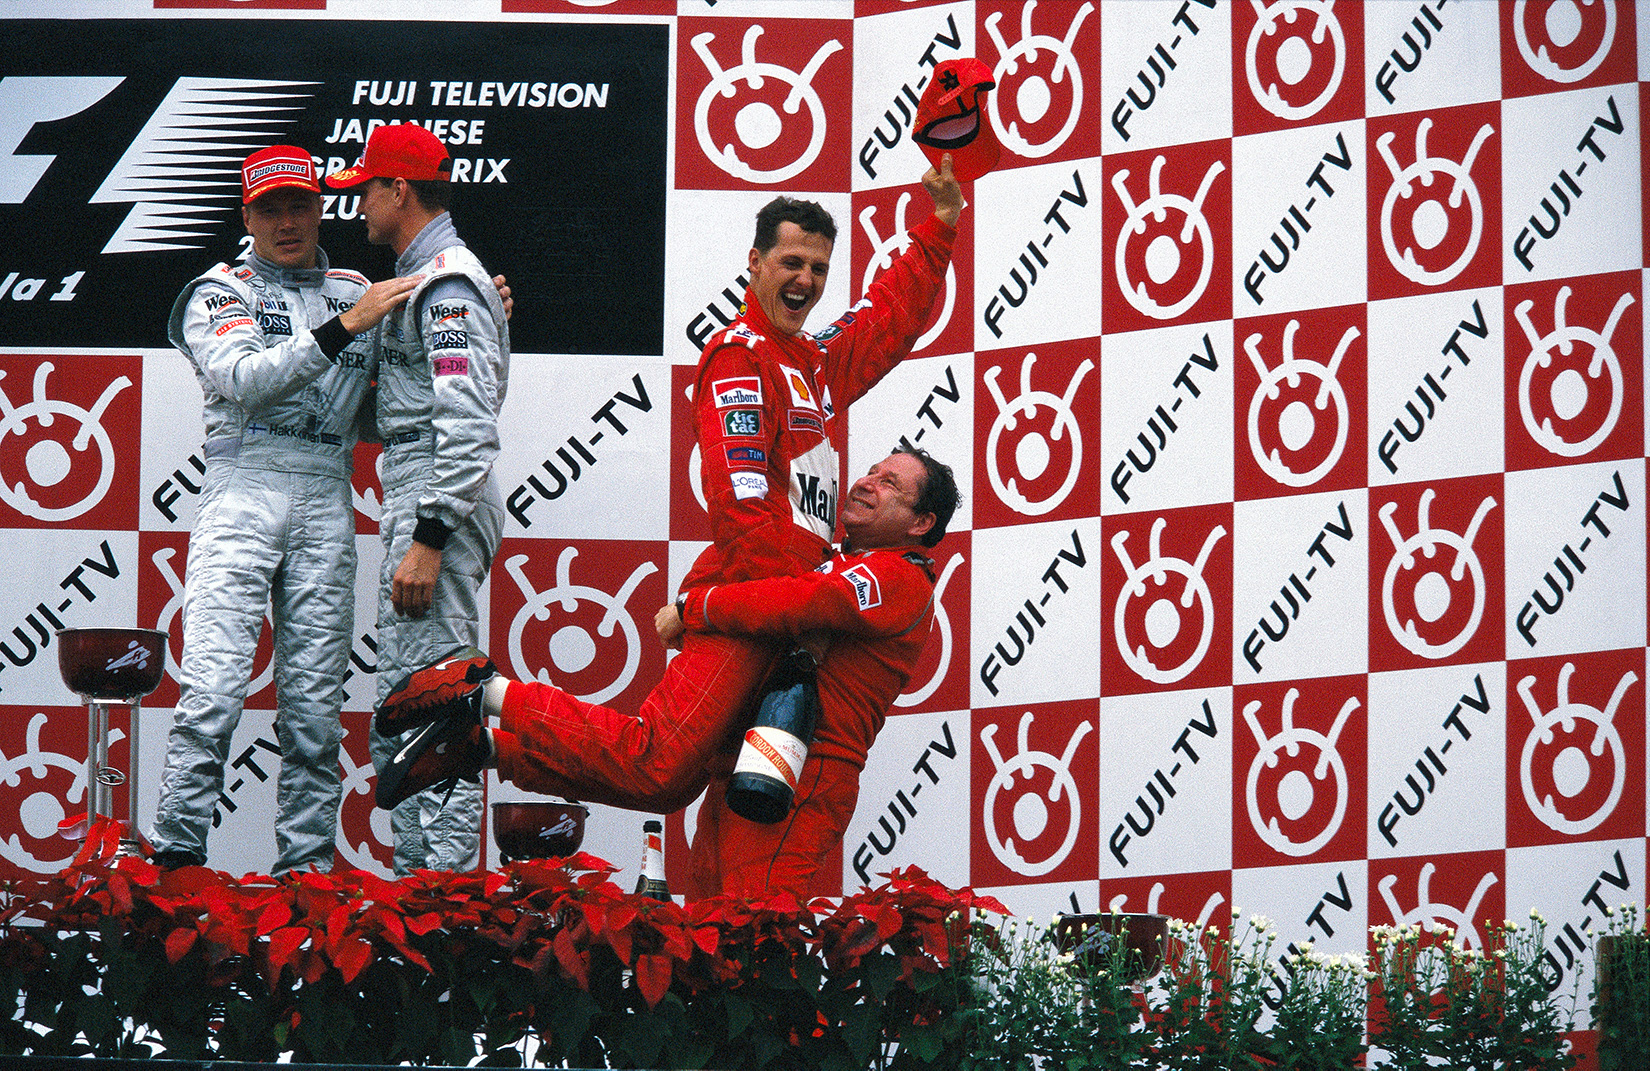 "Michael Schumacher’s greatest moment: The Japanese GP 2000, when he finally won the world title for Ferrari...after a 21-year hiatus."